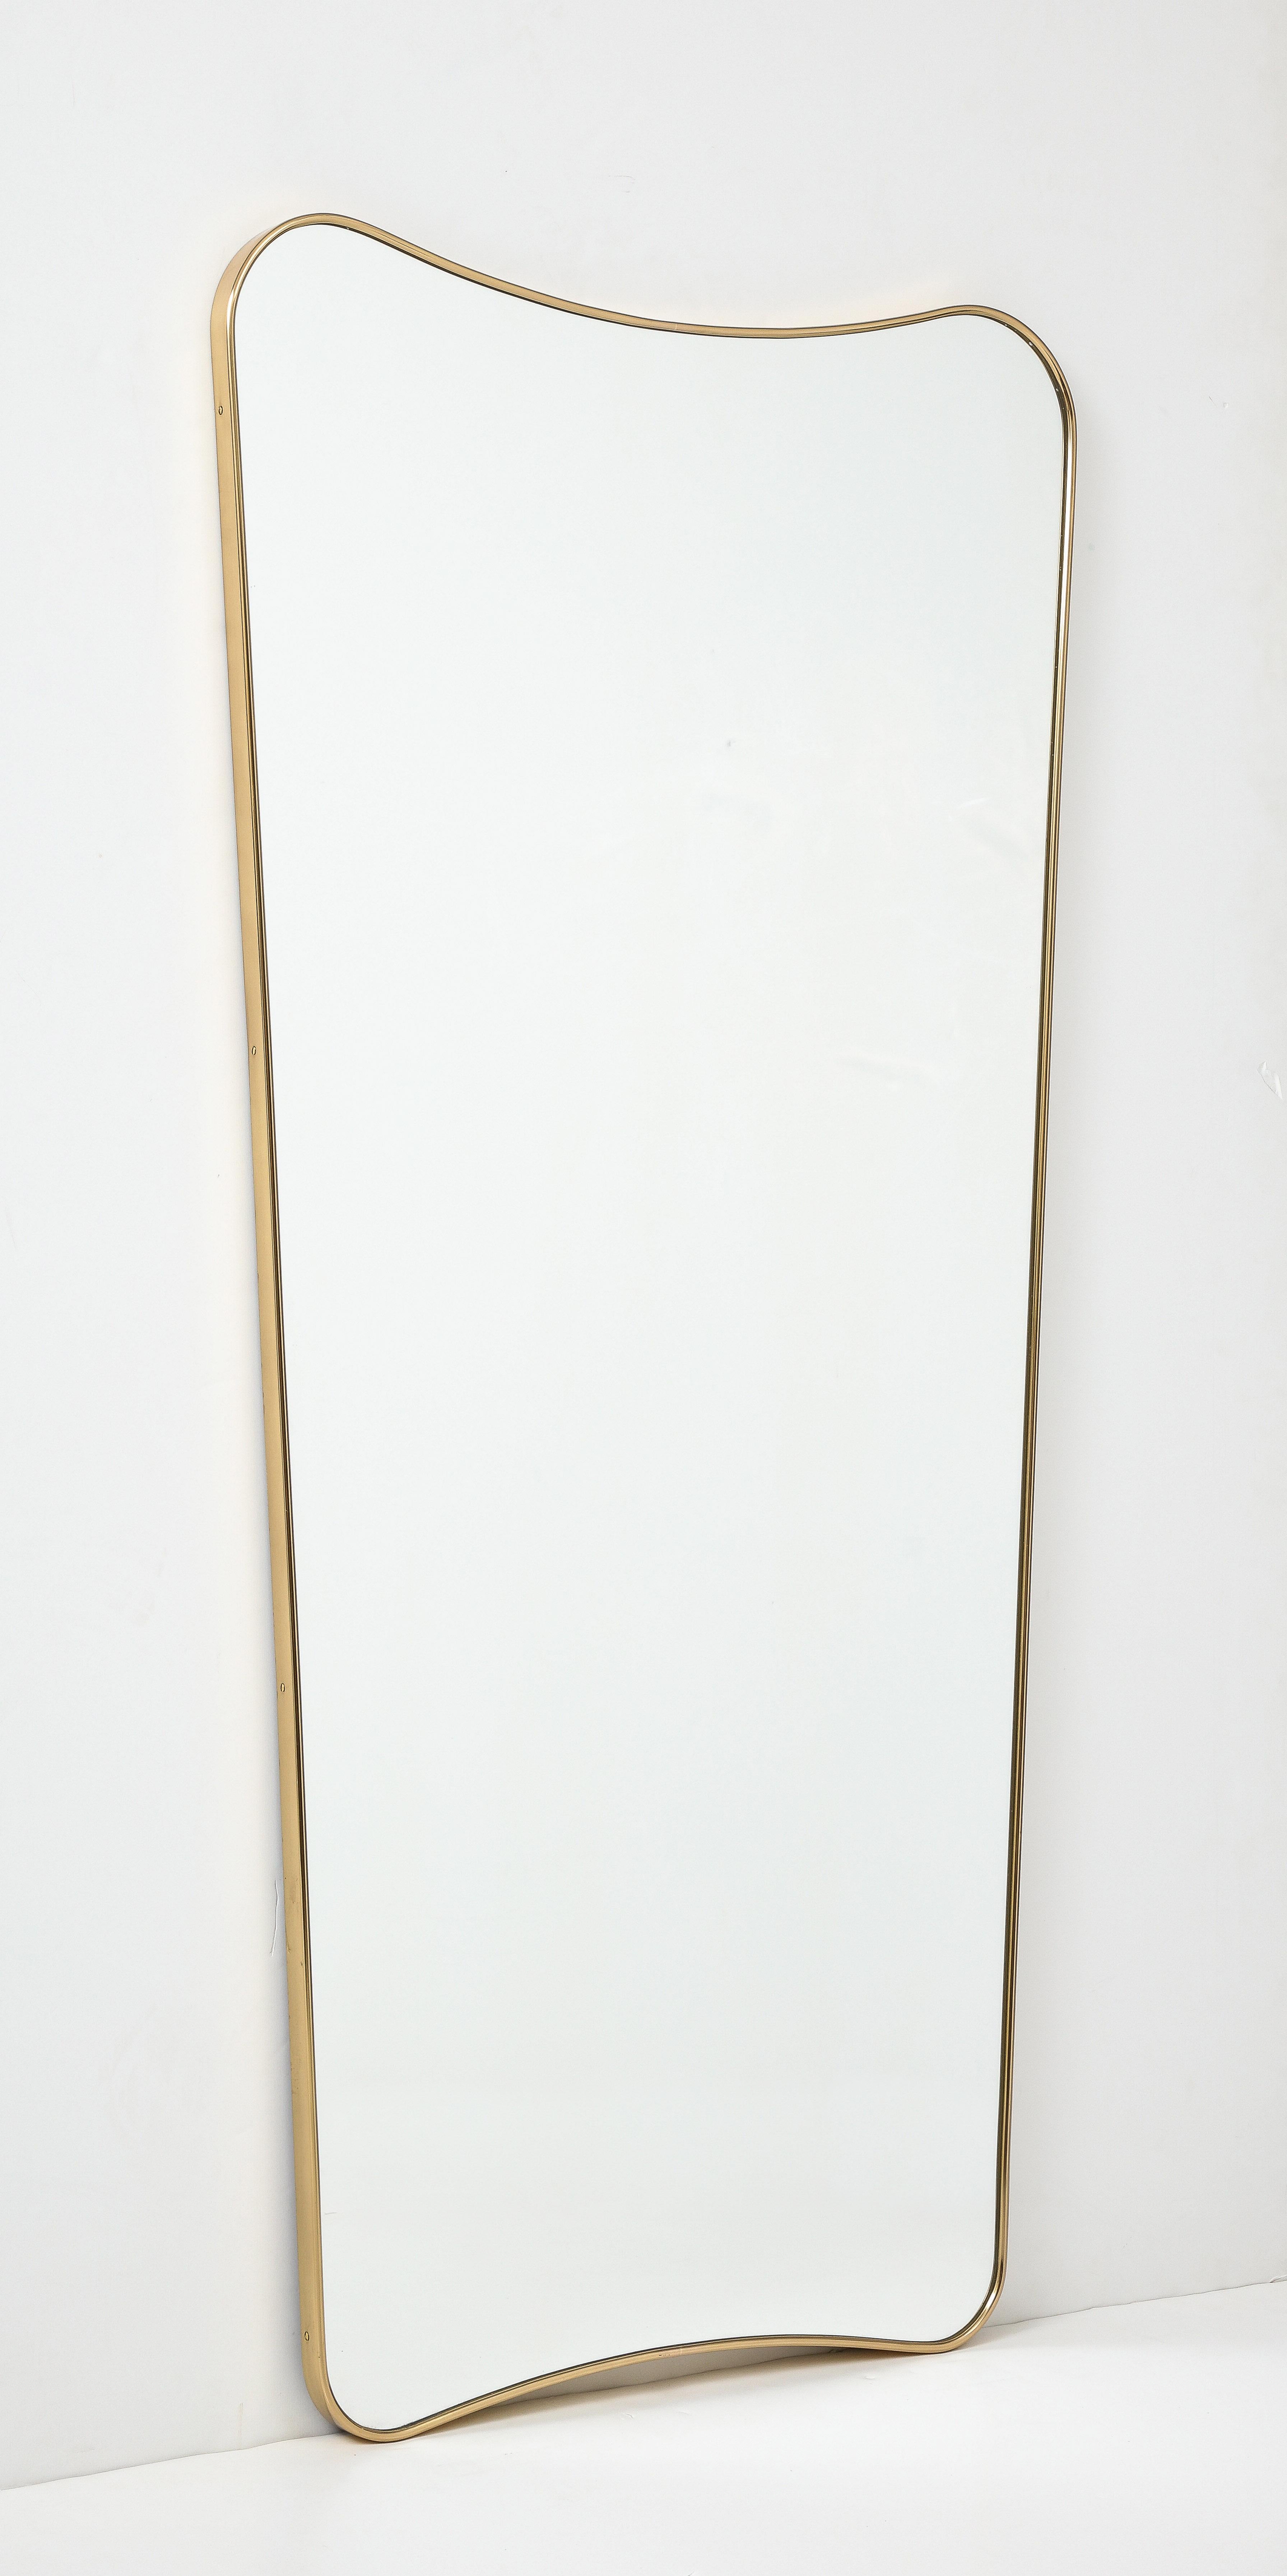 Midcentury modernist Italian mirror featuring a sinuous aged brass frame, styled after Gio Ponti.